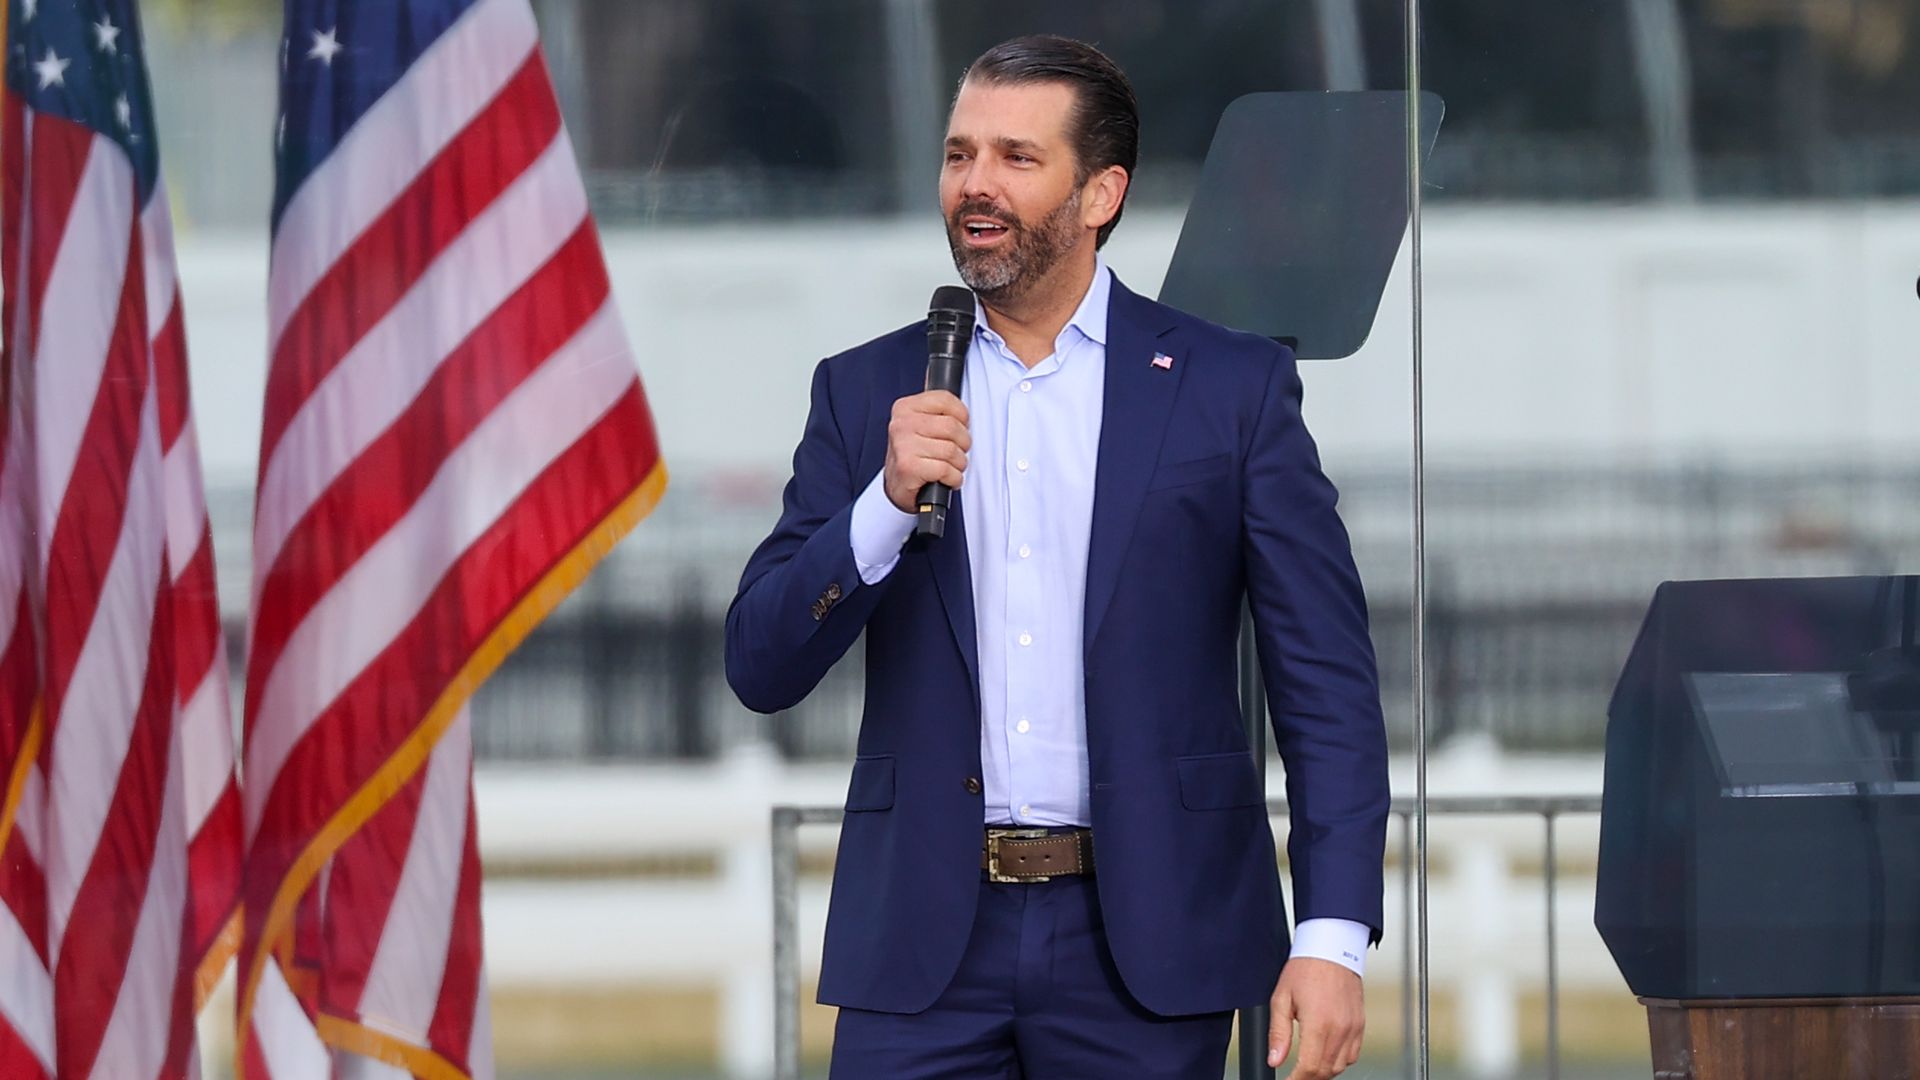 Donald Trump Jr. is seen speaking during a political rally.